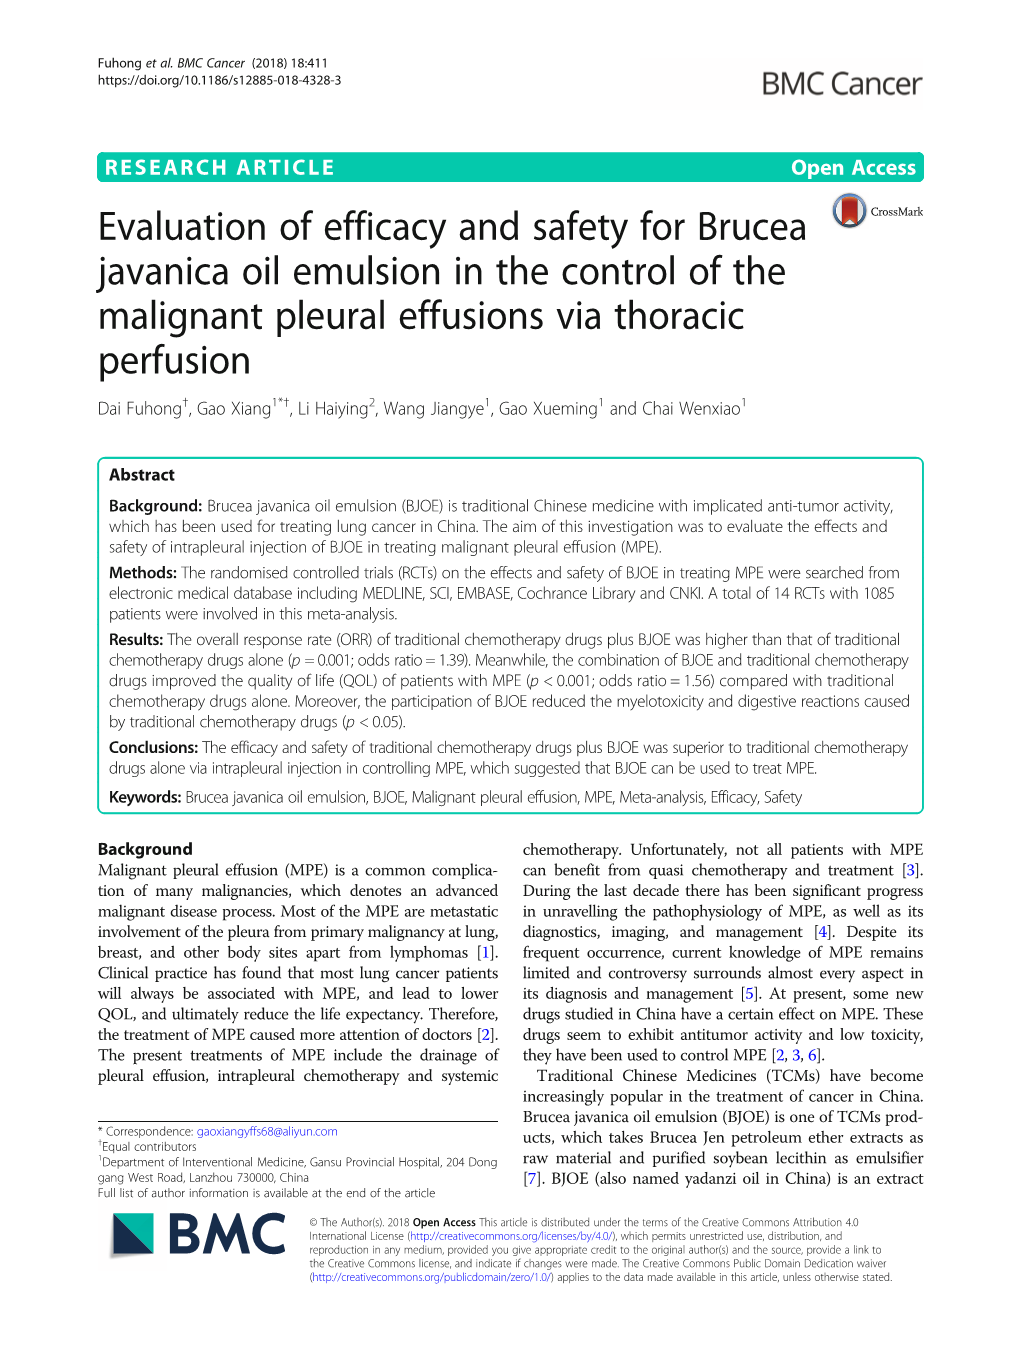 Evaluation of Efficacy and Safety for Brucea Javanica Oil Emulsion in The